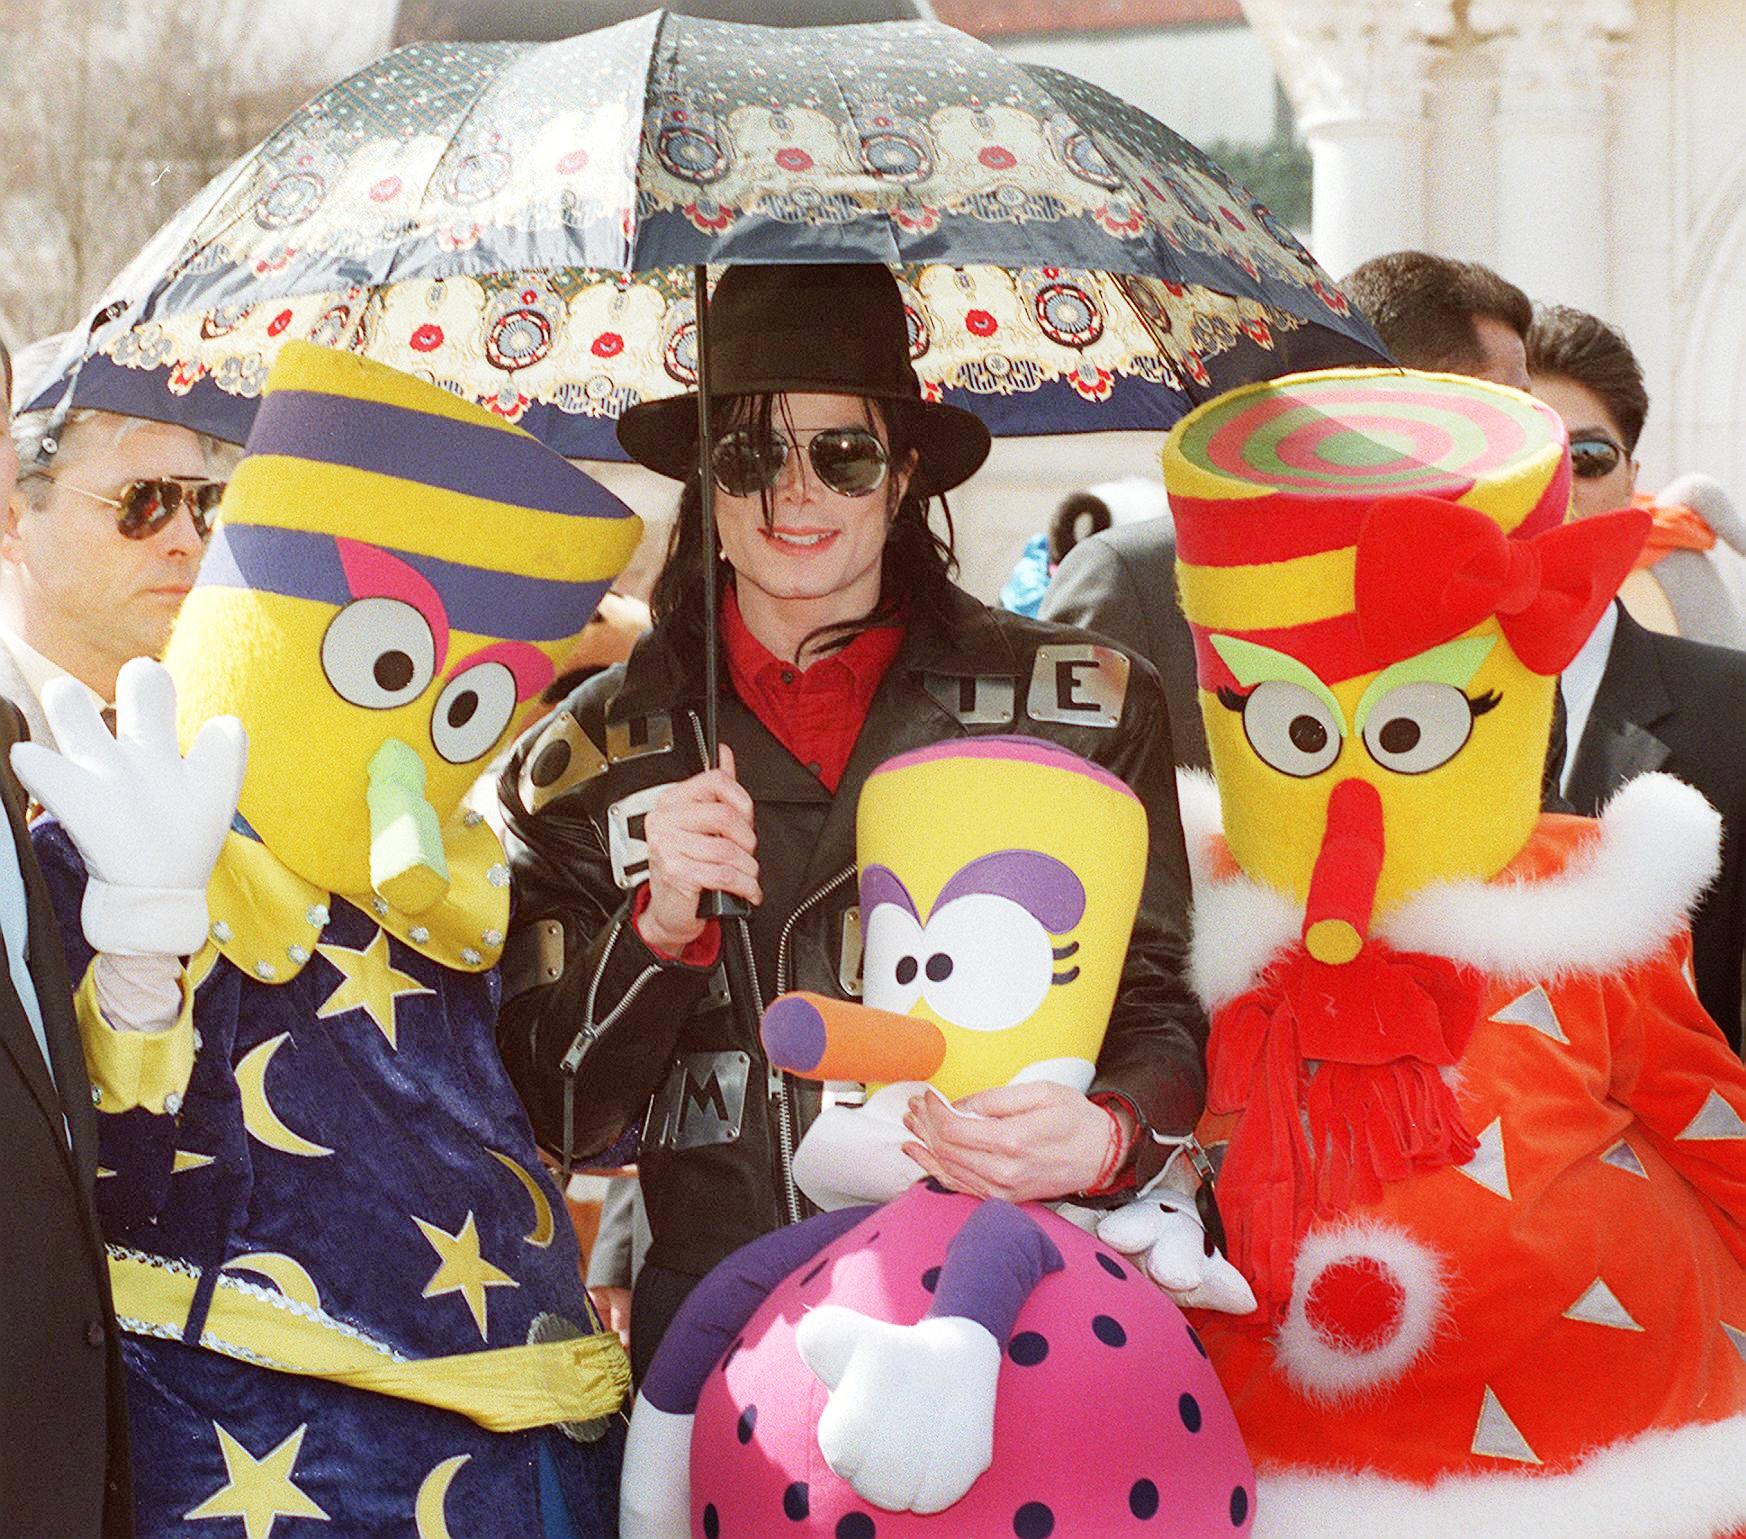 Michael Jackson photographed during a tour of the Everland amusement park in Seoul, 1998 | Source: Getty Images